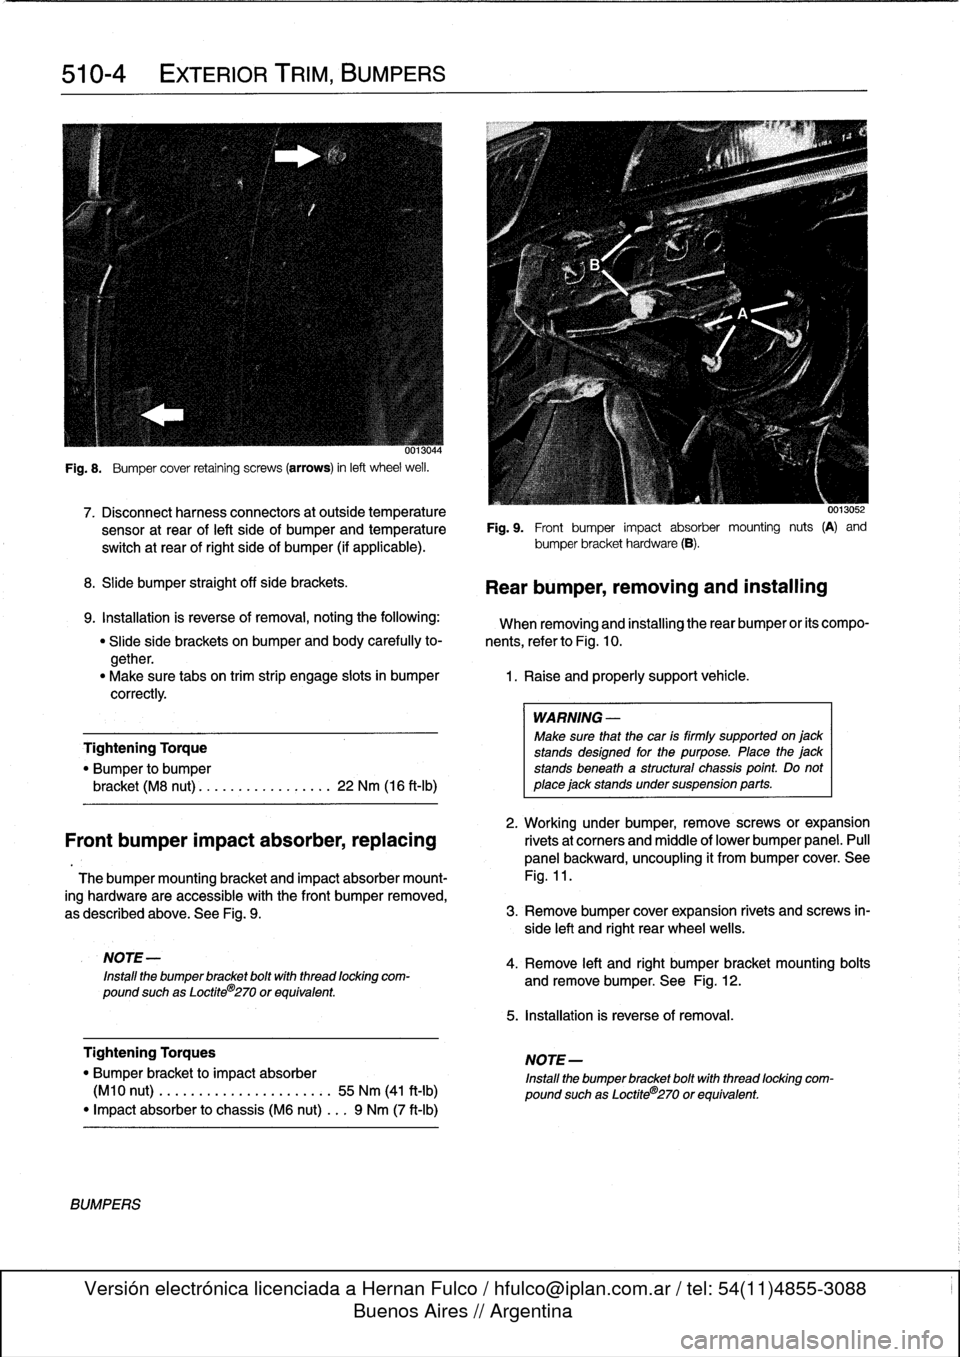 BMW 323i 1997 E36 Service Manual 
510-4

	

EXTERIOR
TRIM,
BUMPERS

Fig
.
8
.

	

Bumper
cover
retaining
screws
(arrows)
in
left
wheel
weil
.

7
.
Disconnect
harnessconnectors
at
outside
temperature

	

0013052

sensor
at
rear
of
lef